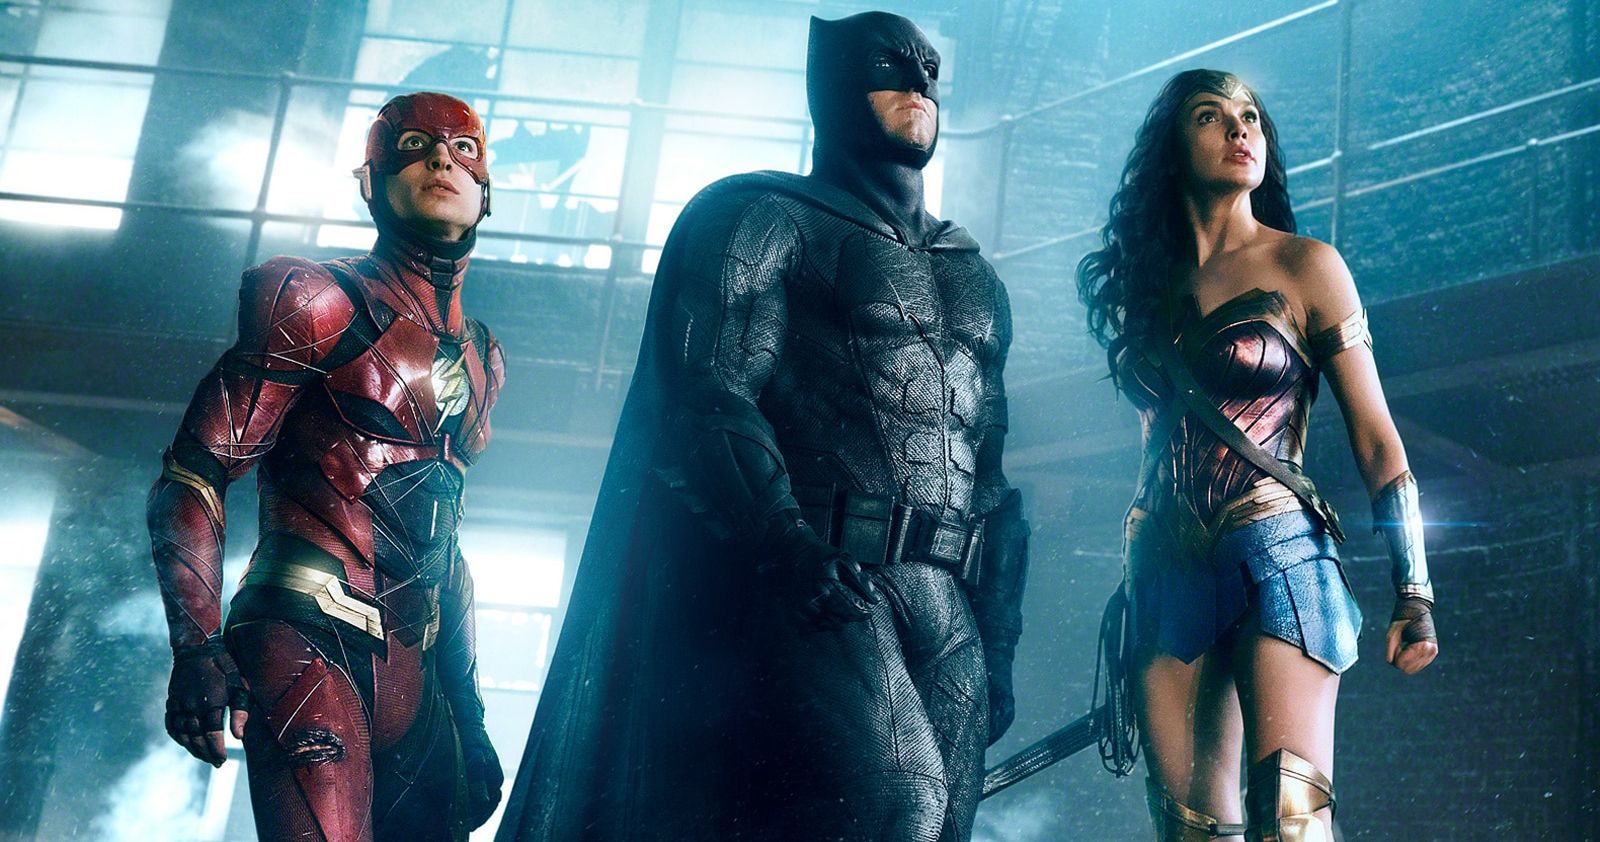 Wonder Woman Is the Glue That Holds HBO Max's Justice League Miniseries Together Says Zack Snyder